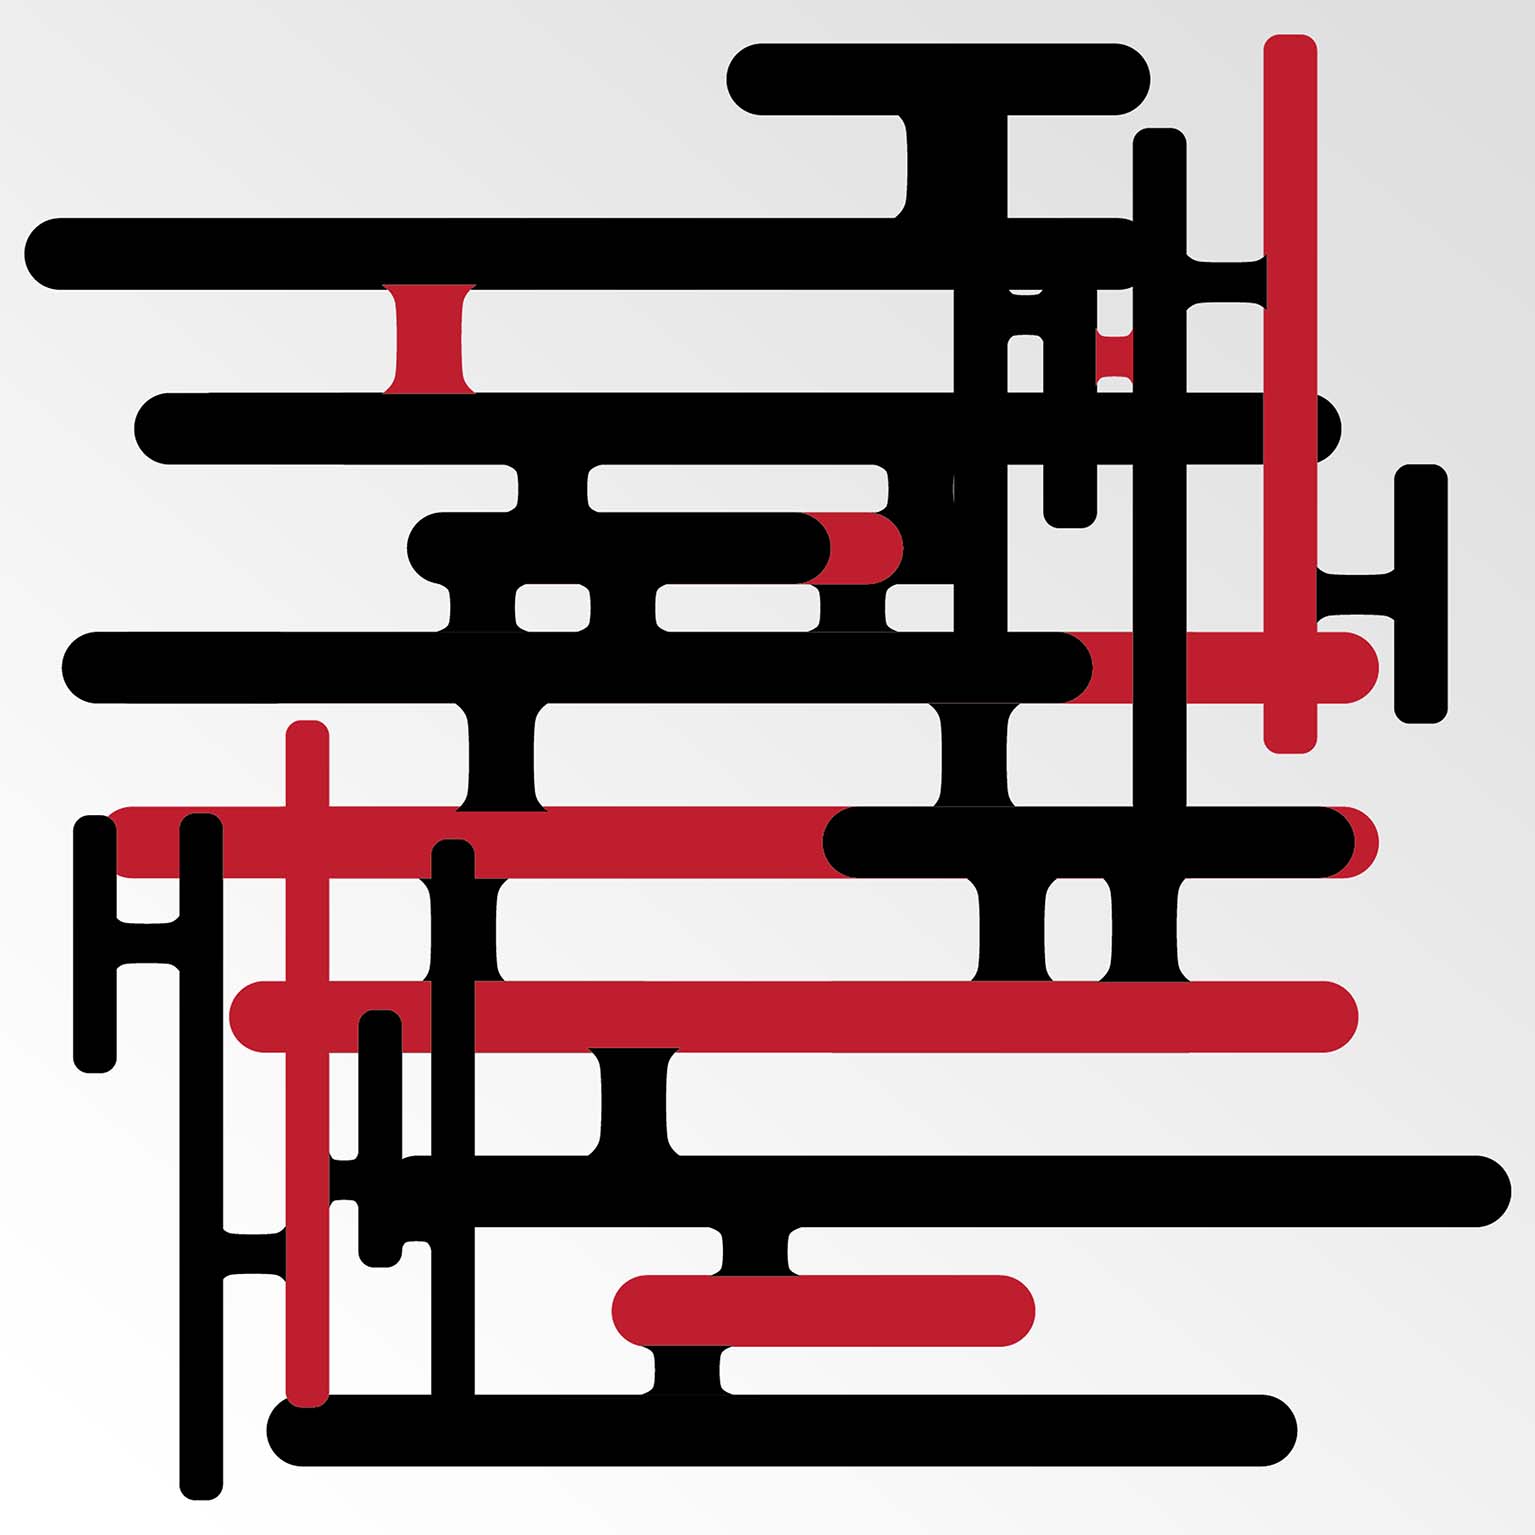 various black and red lines intersecting one another forming multiple E shapes